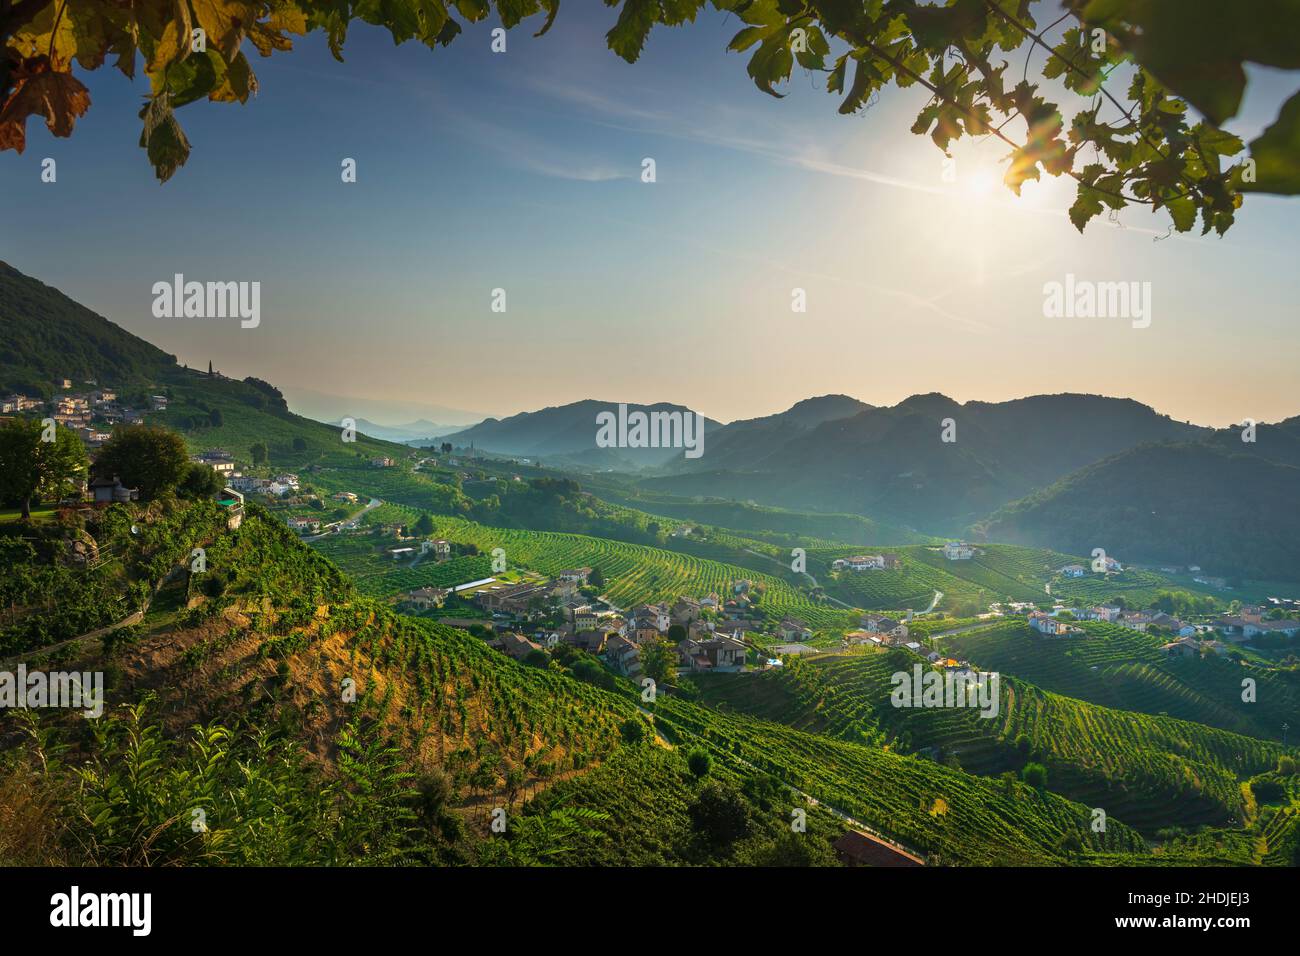 Prosecco Hills, vineyards panoramic landscape in the morning and leaves as a frame. Unesco World Heritage Site. Valdobbiadene, Treviso province, Venet Stock Photo